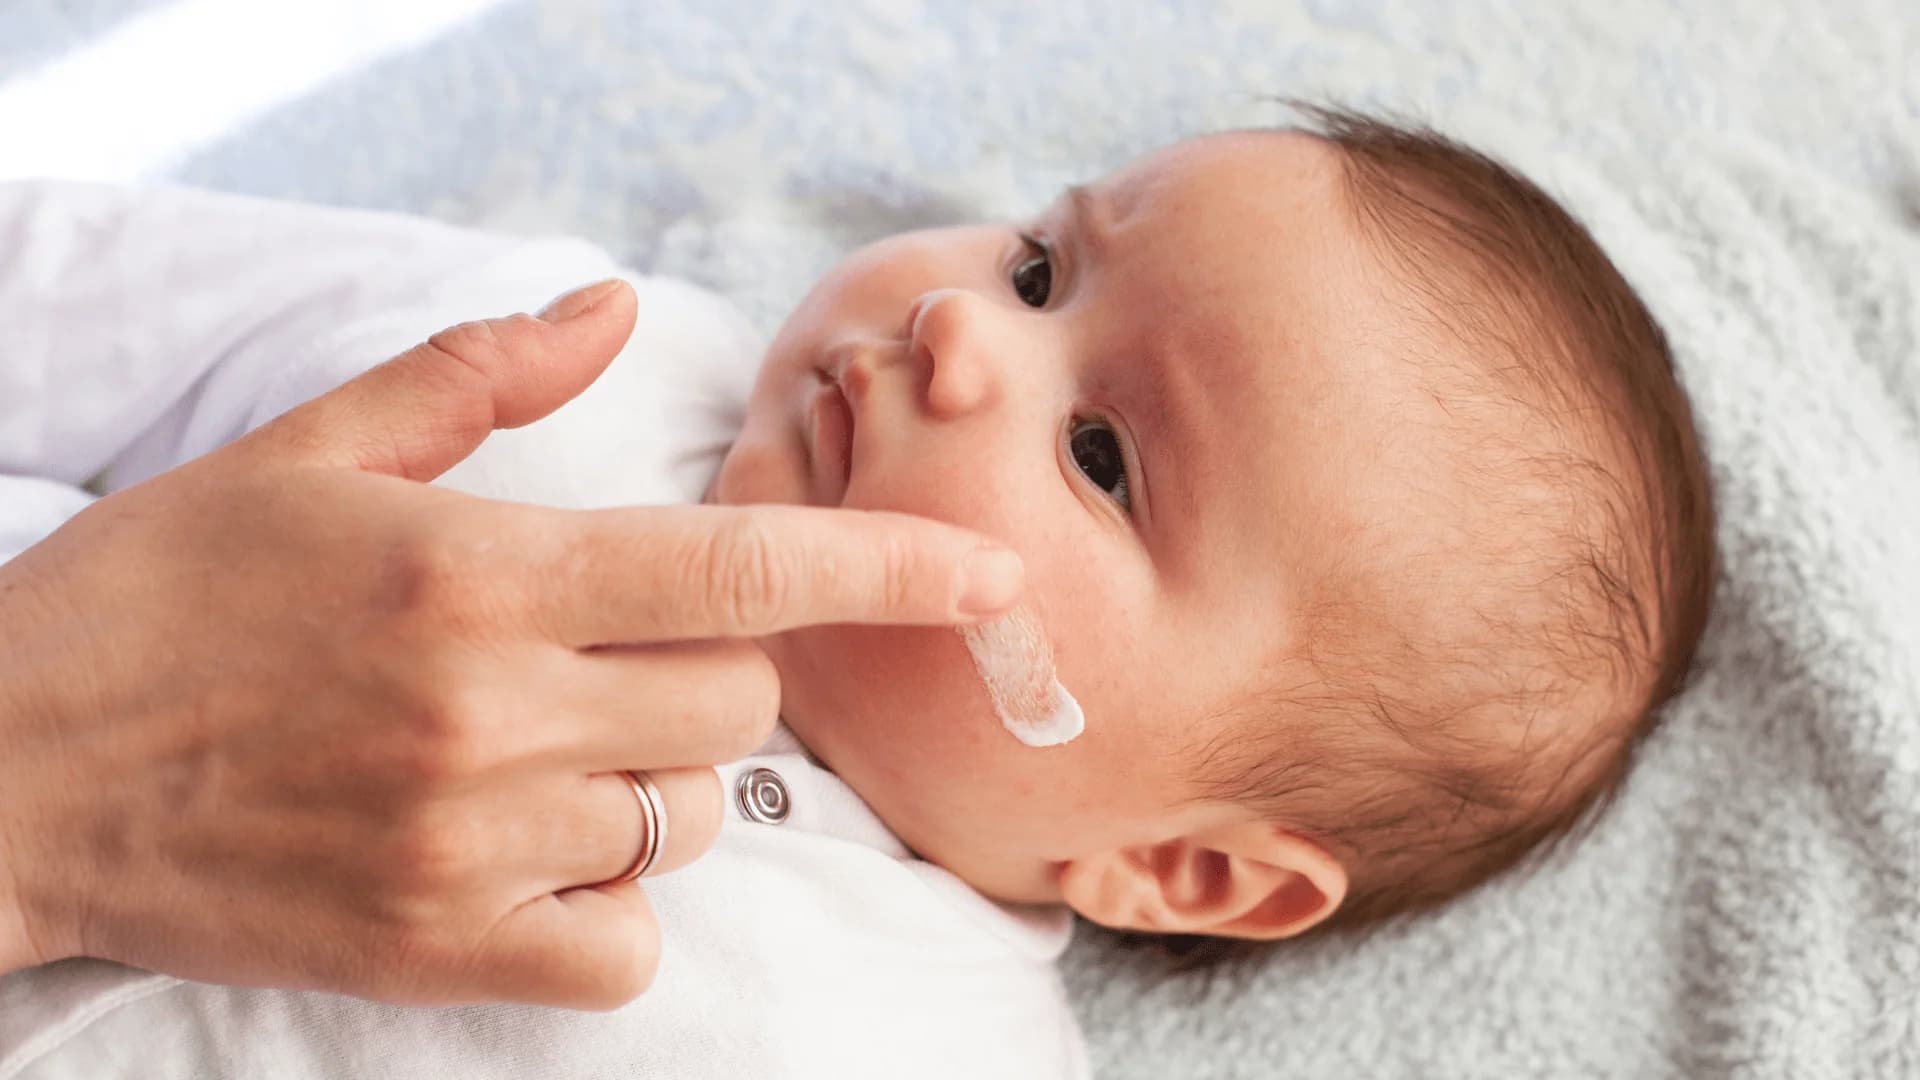 Dressing a newborn with sensitive skin and allergies